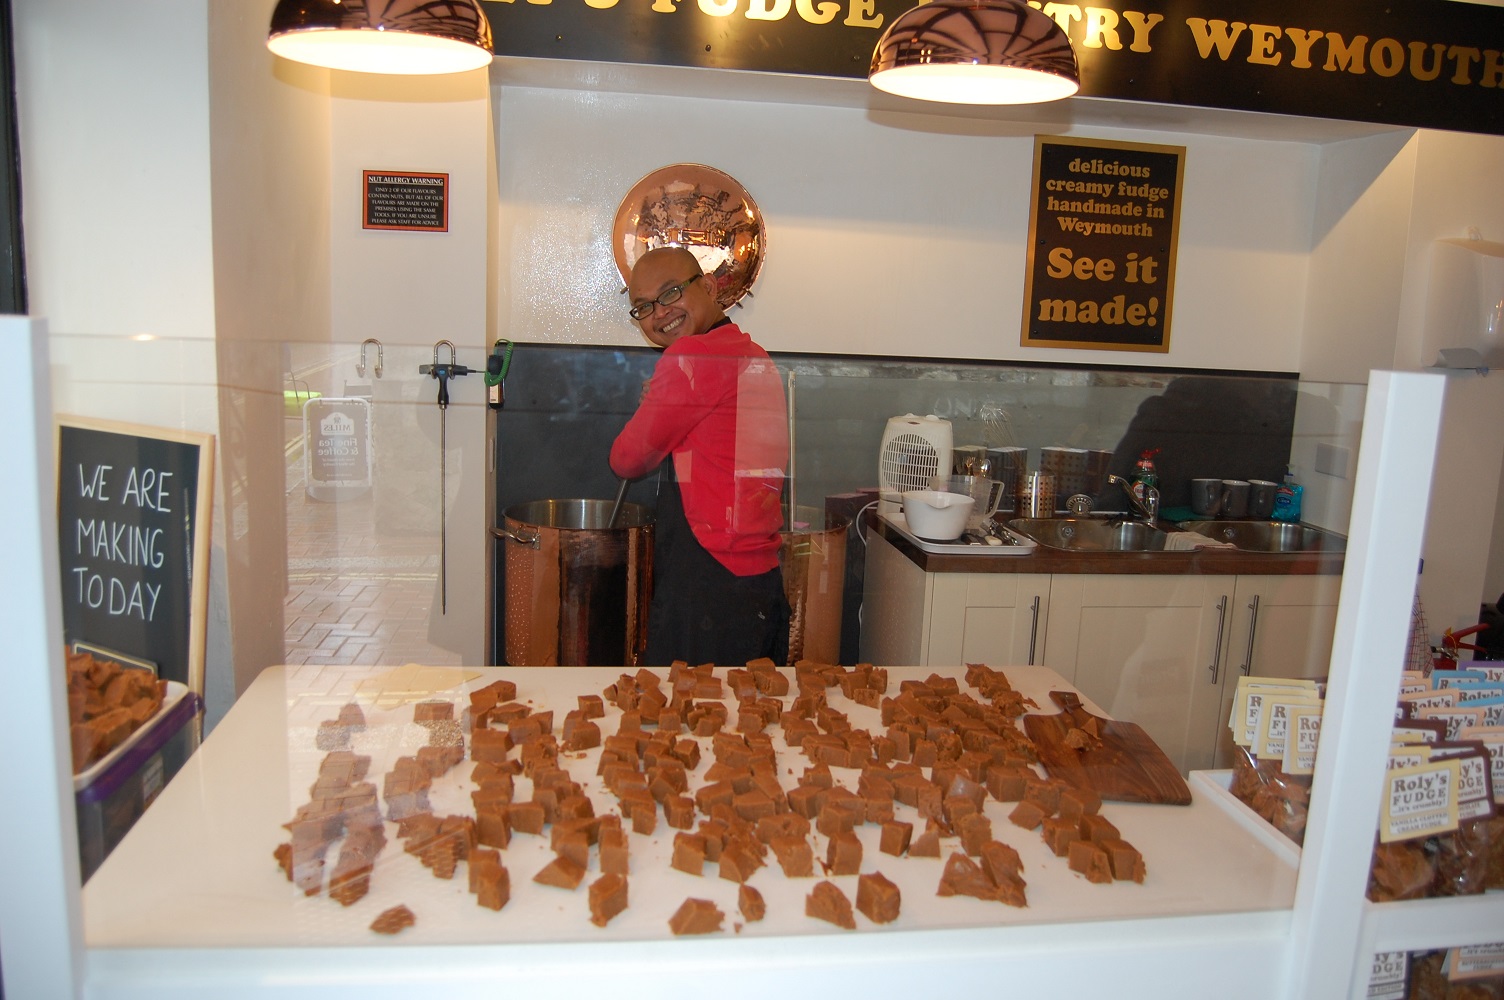 Fudge being made in Weymouth